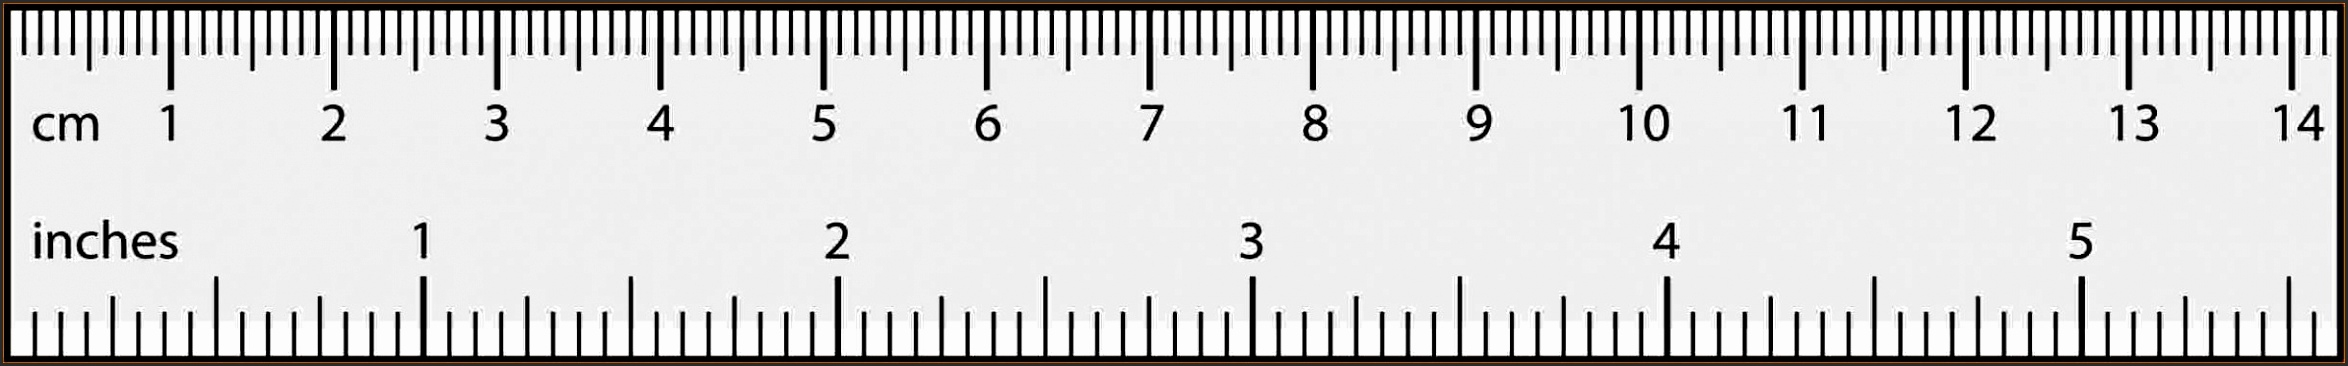 69 Free Printable Rulers | Kittybabylove